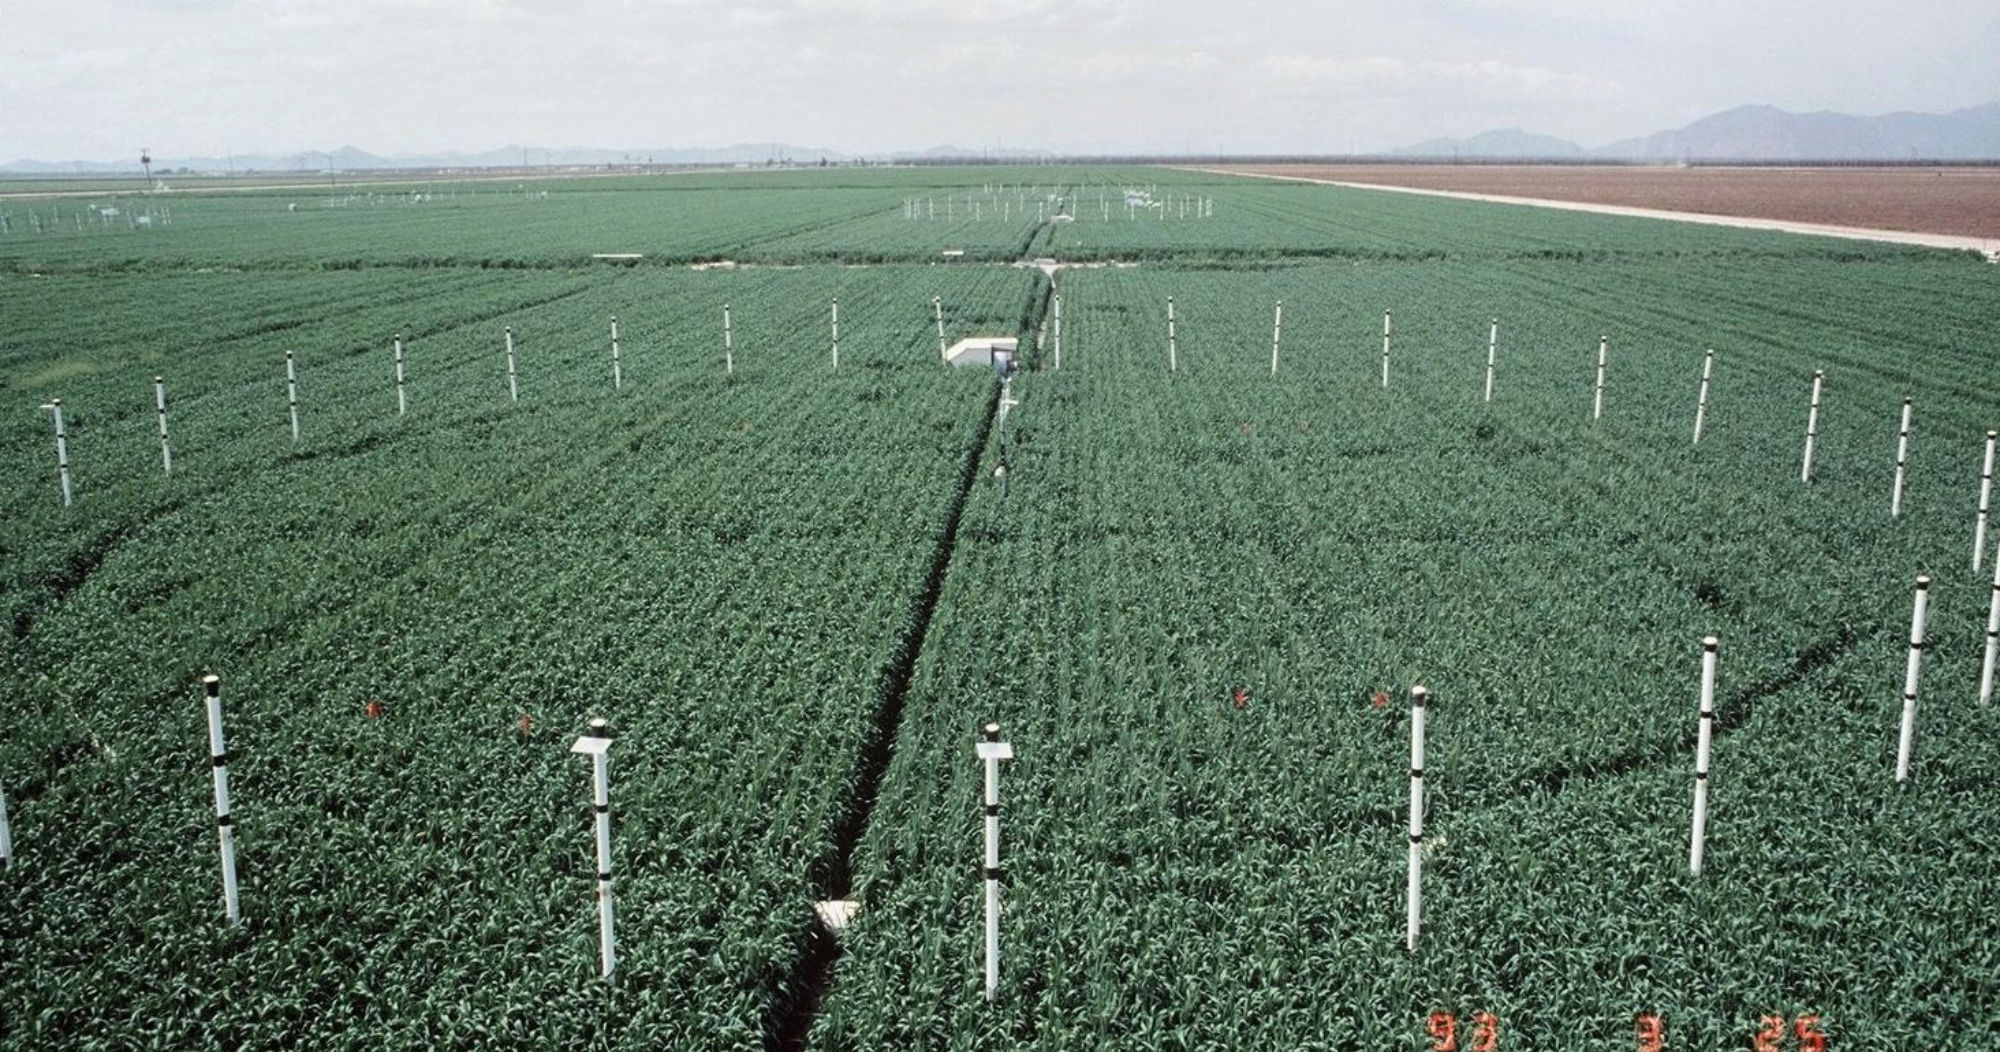 Photo of a field of crops with vertical poles that release carbon dioxide gas, for running experiments on plant growth